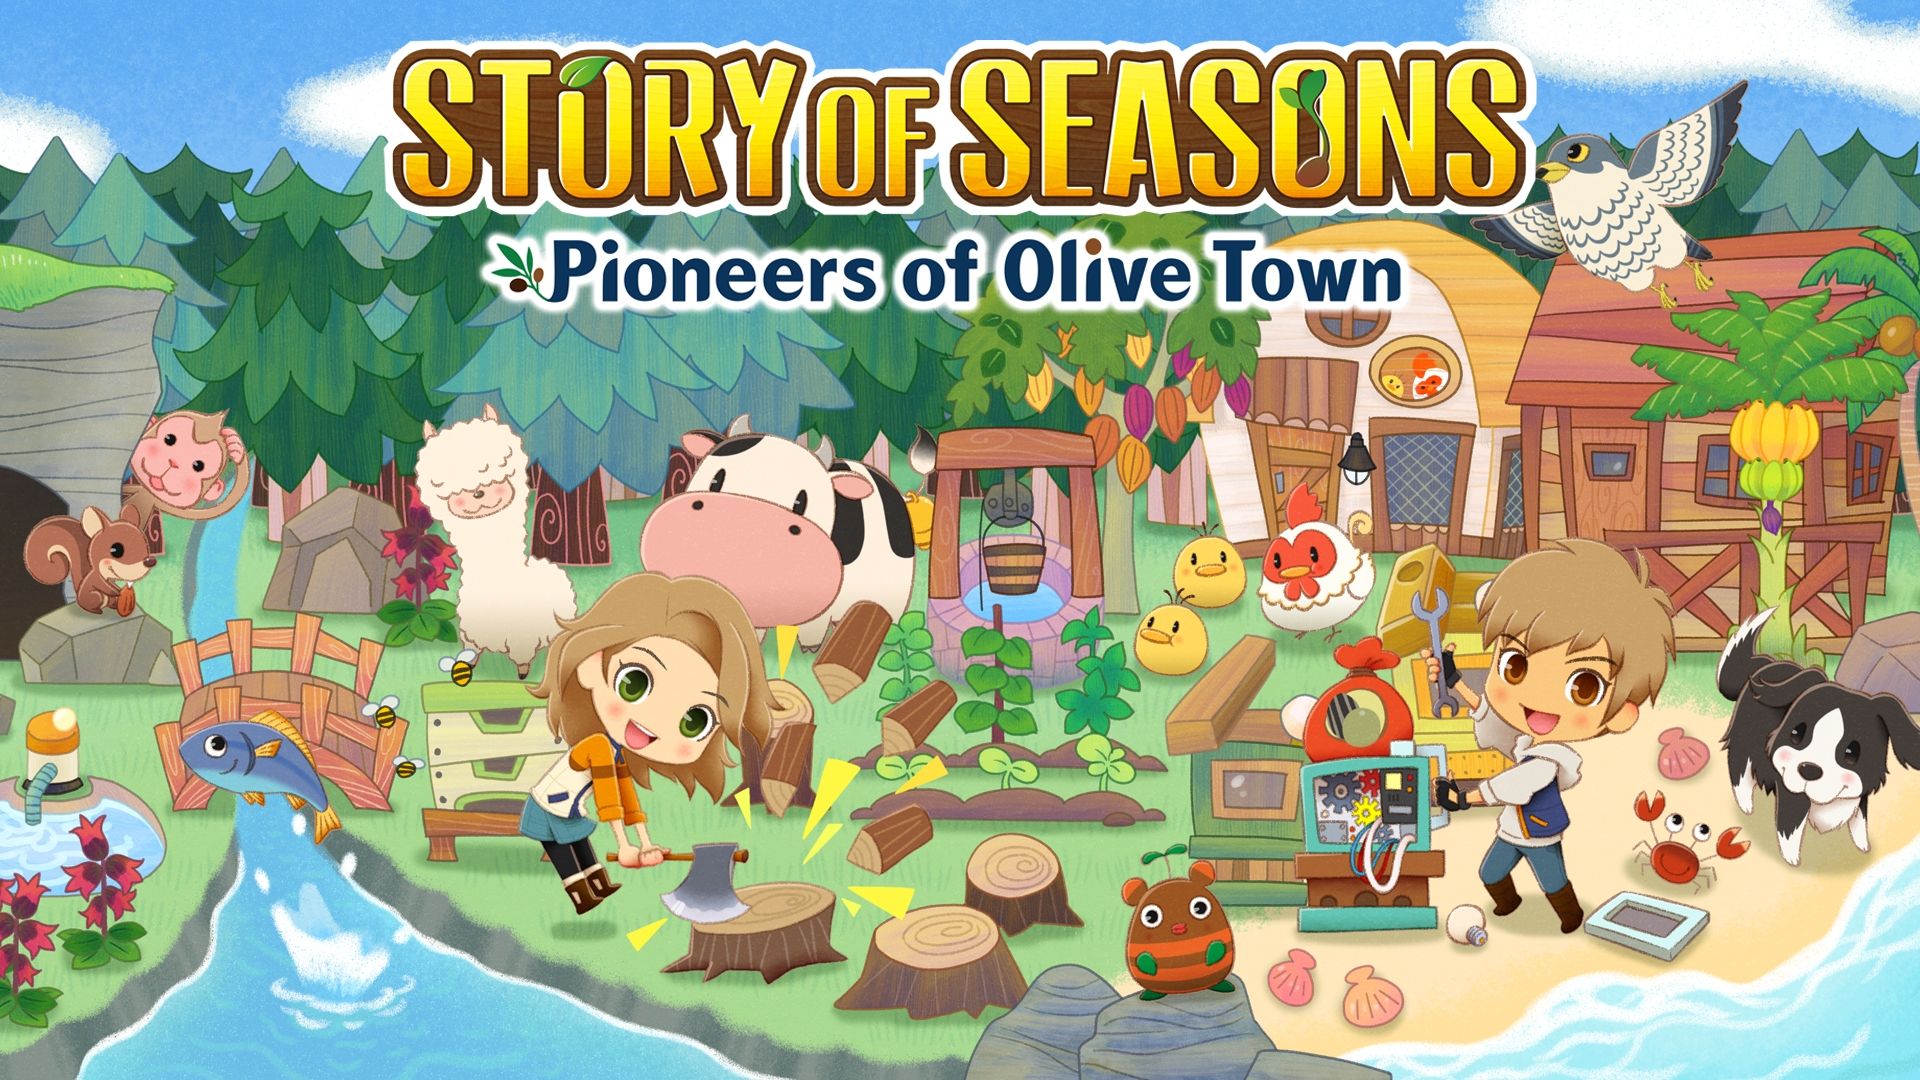 Story of Seasons: Pioneers of Olive Town bachelors Release time